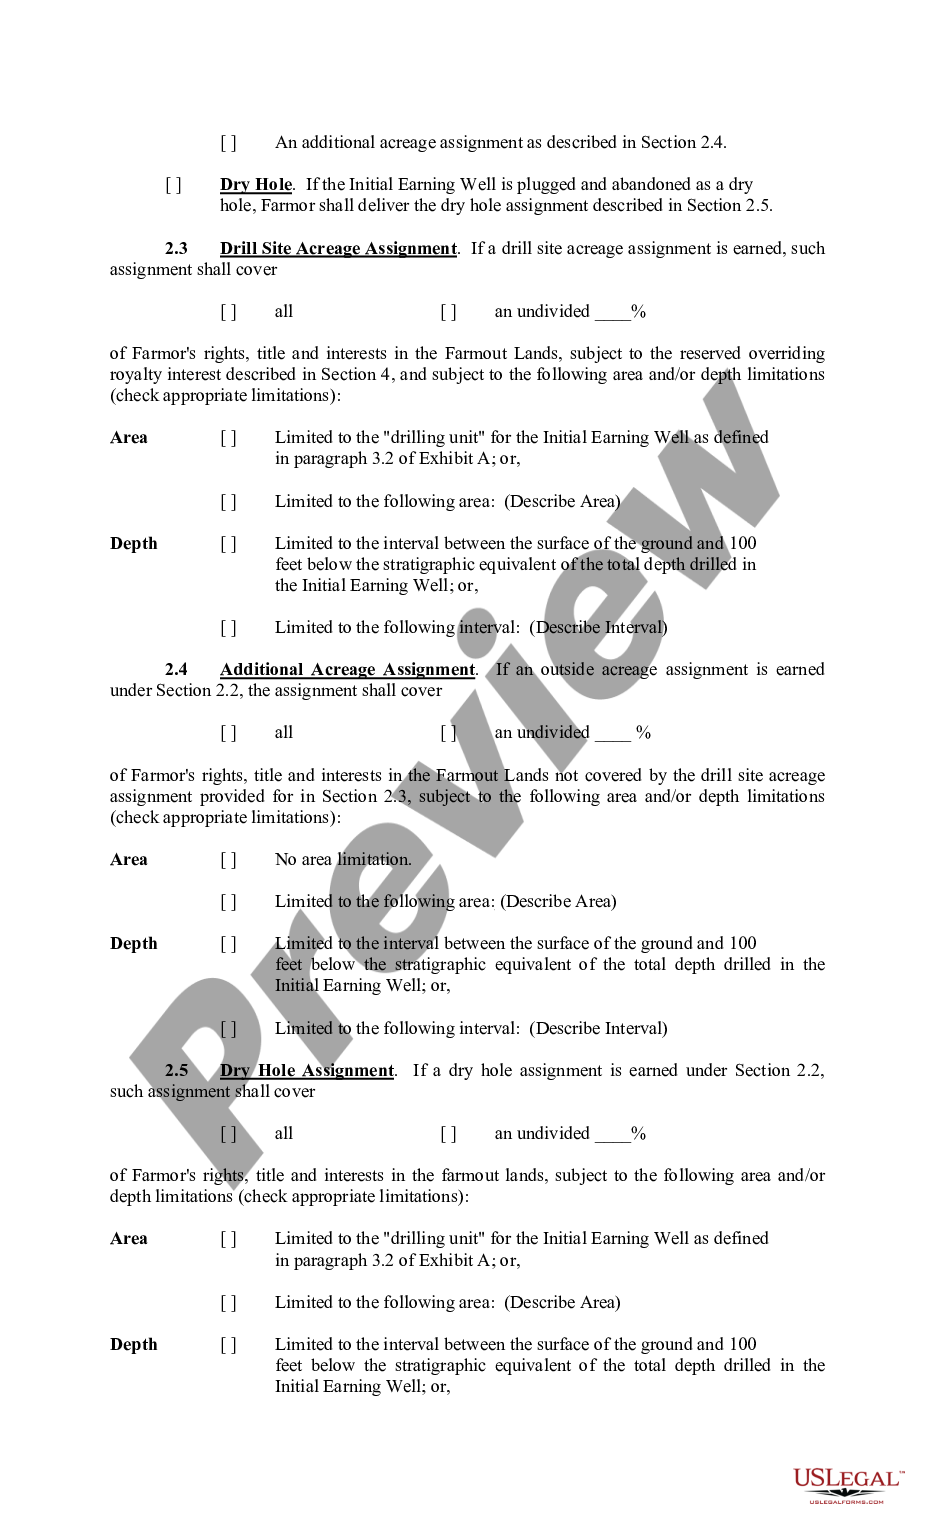 page 1 Farmout Agreement Providing For Multiple Wells with Dry Hole Earning An Assignment preview